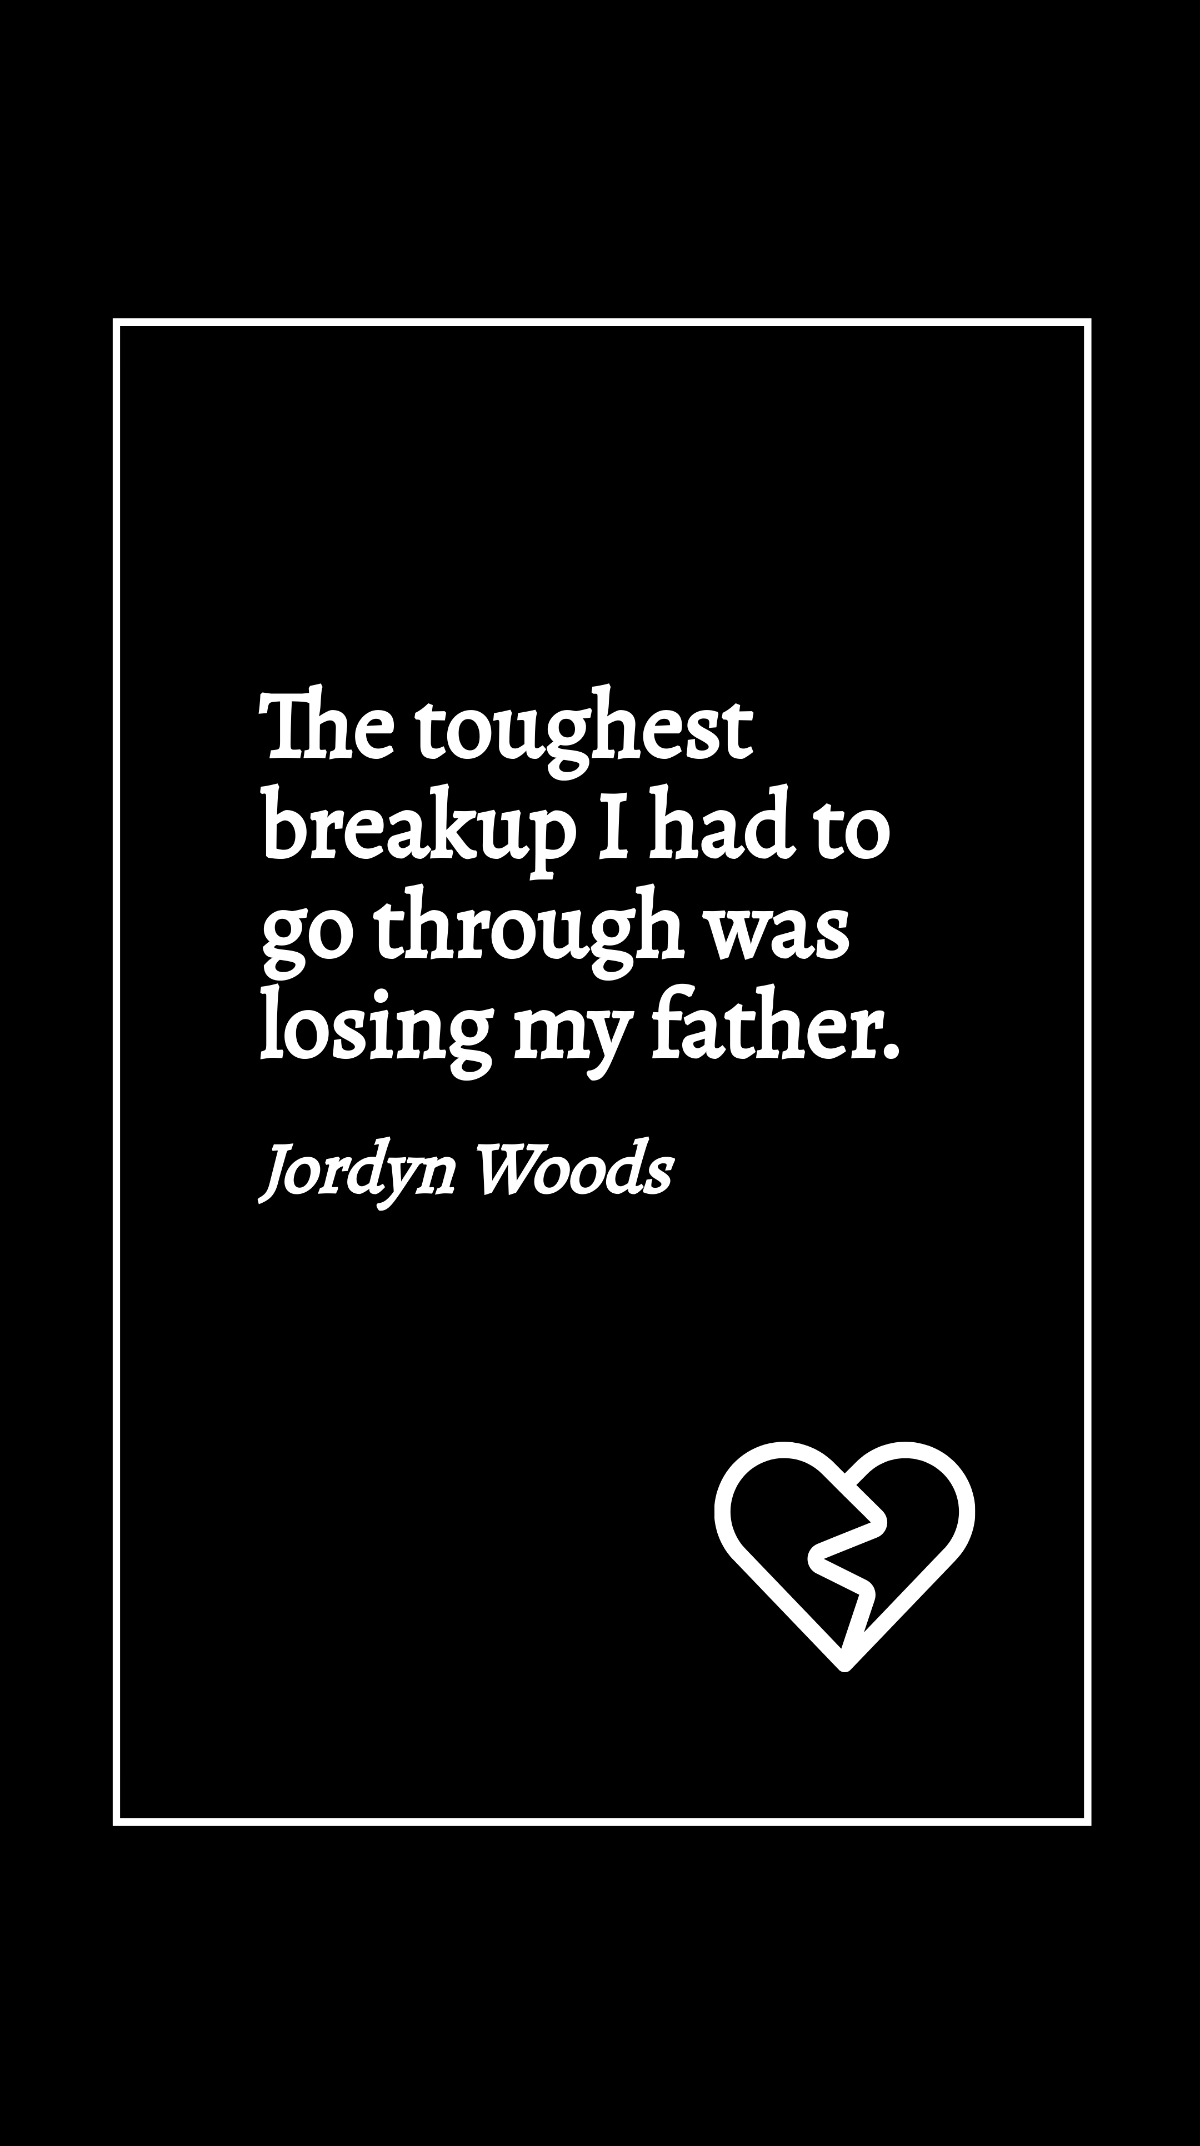 Jordyn Woods - The toughest breakup I had to go through was losing my father. Template